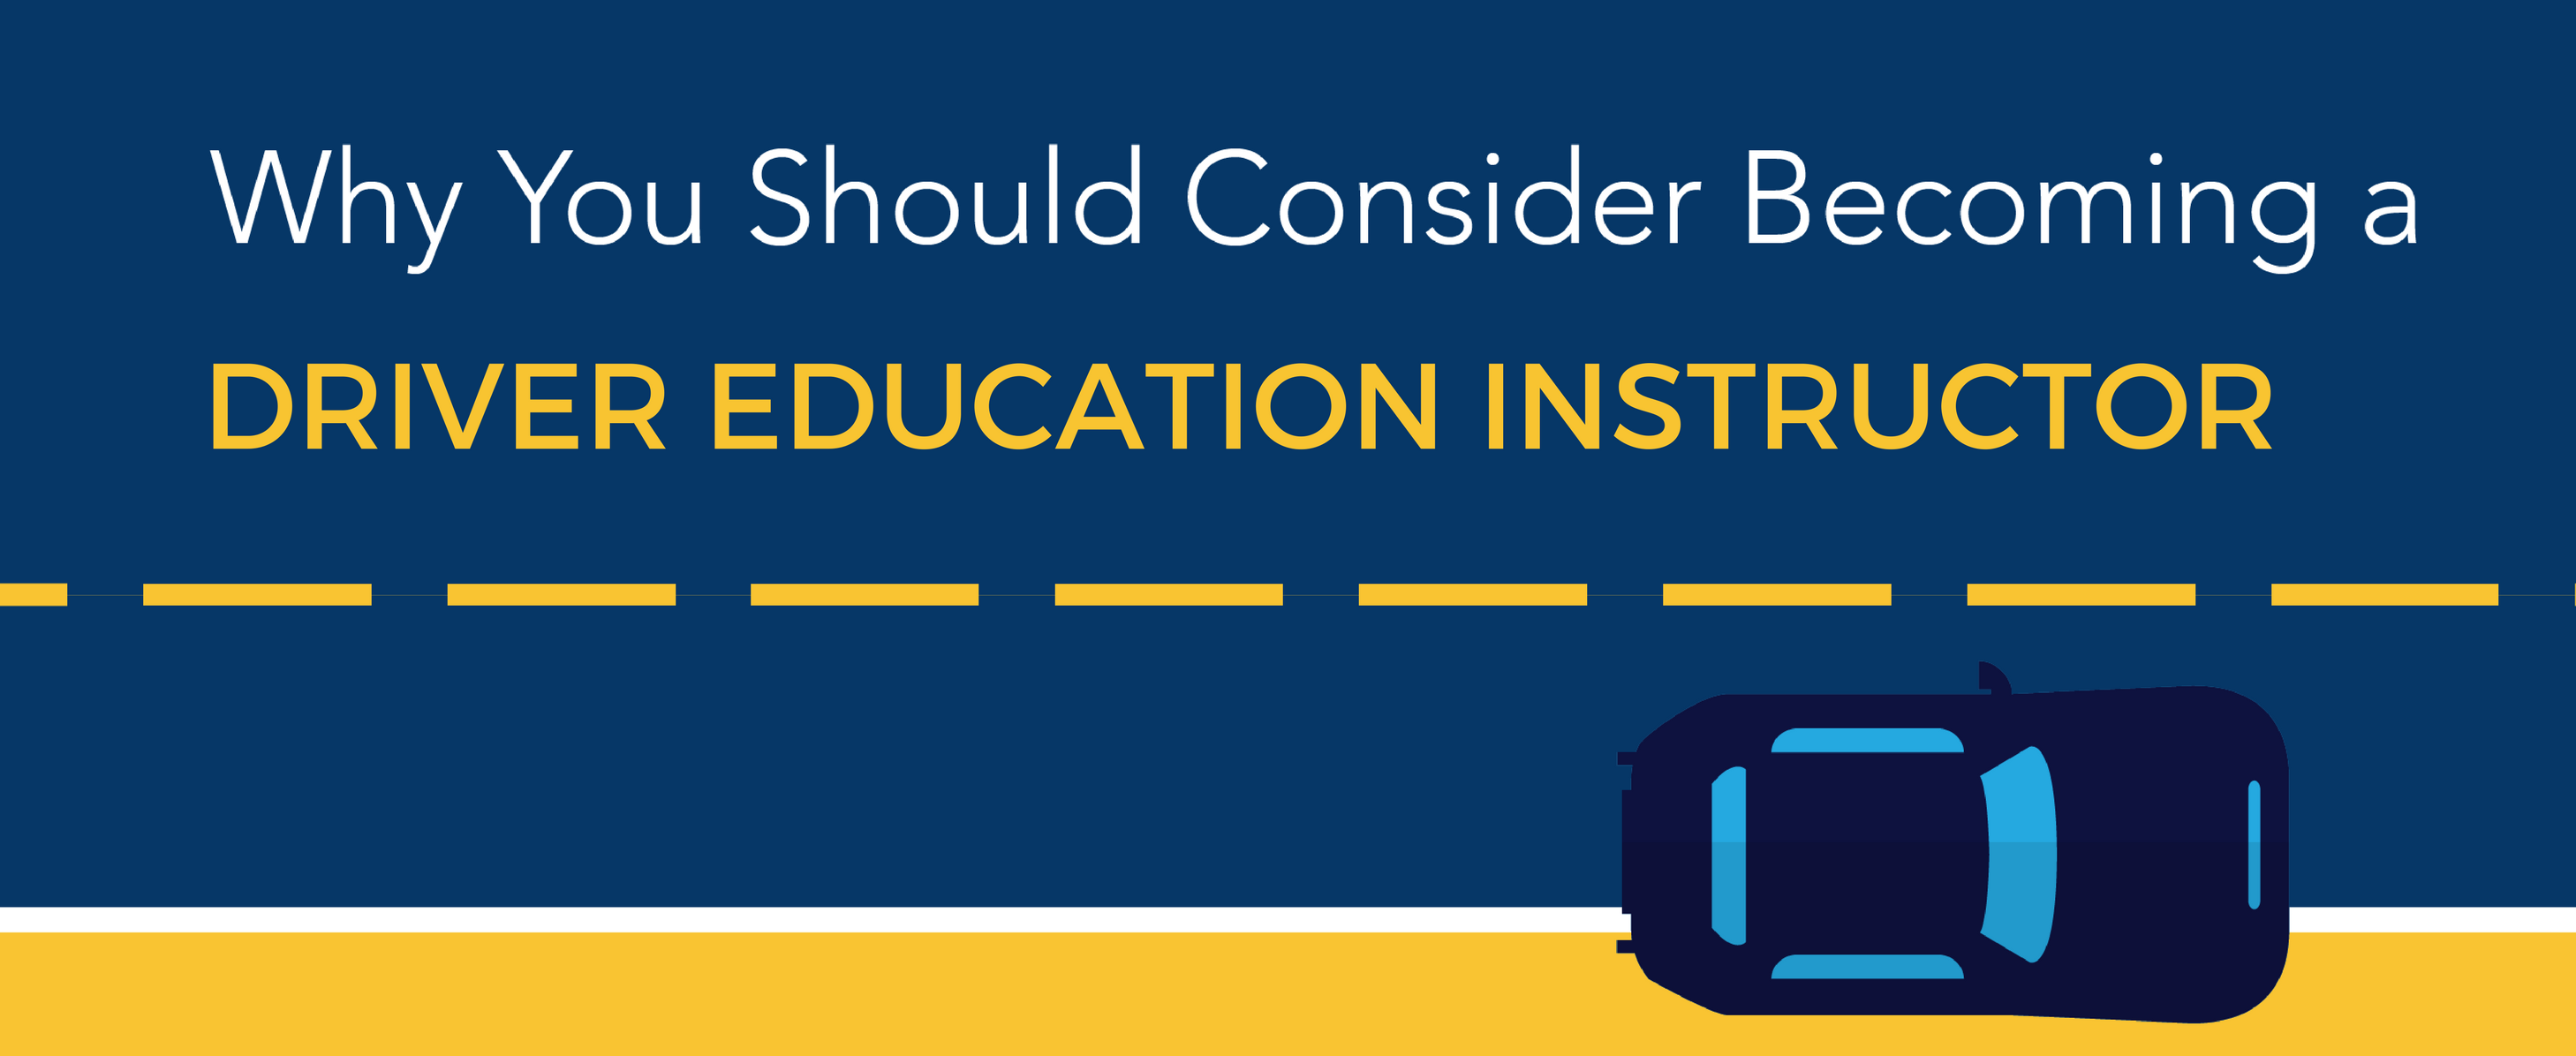 Why you should consider becoming a driver education instructor